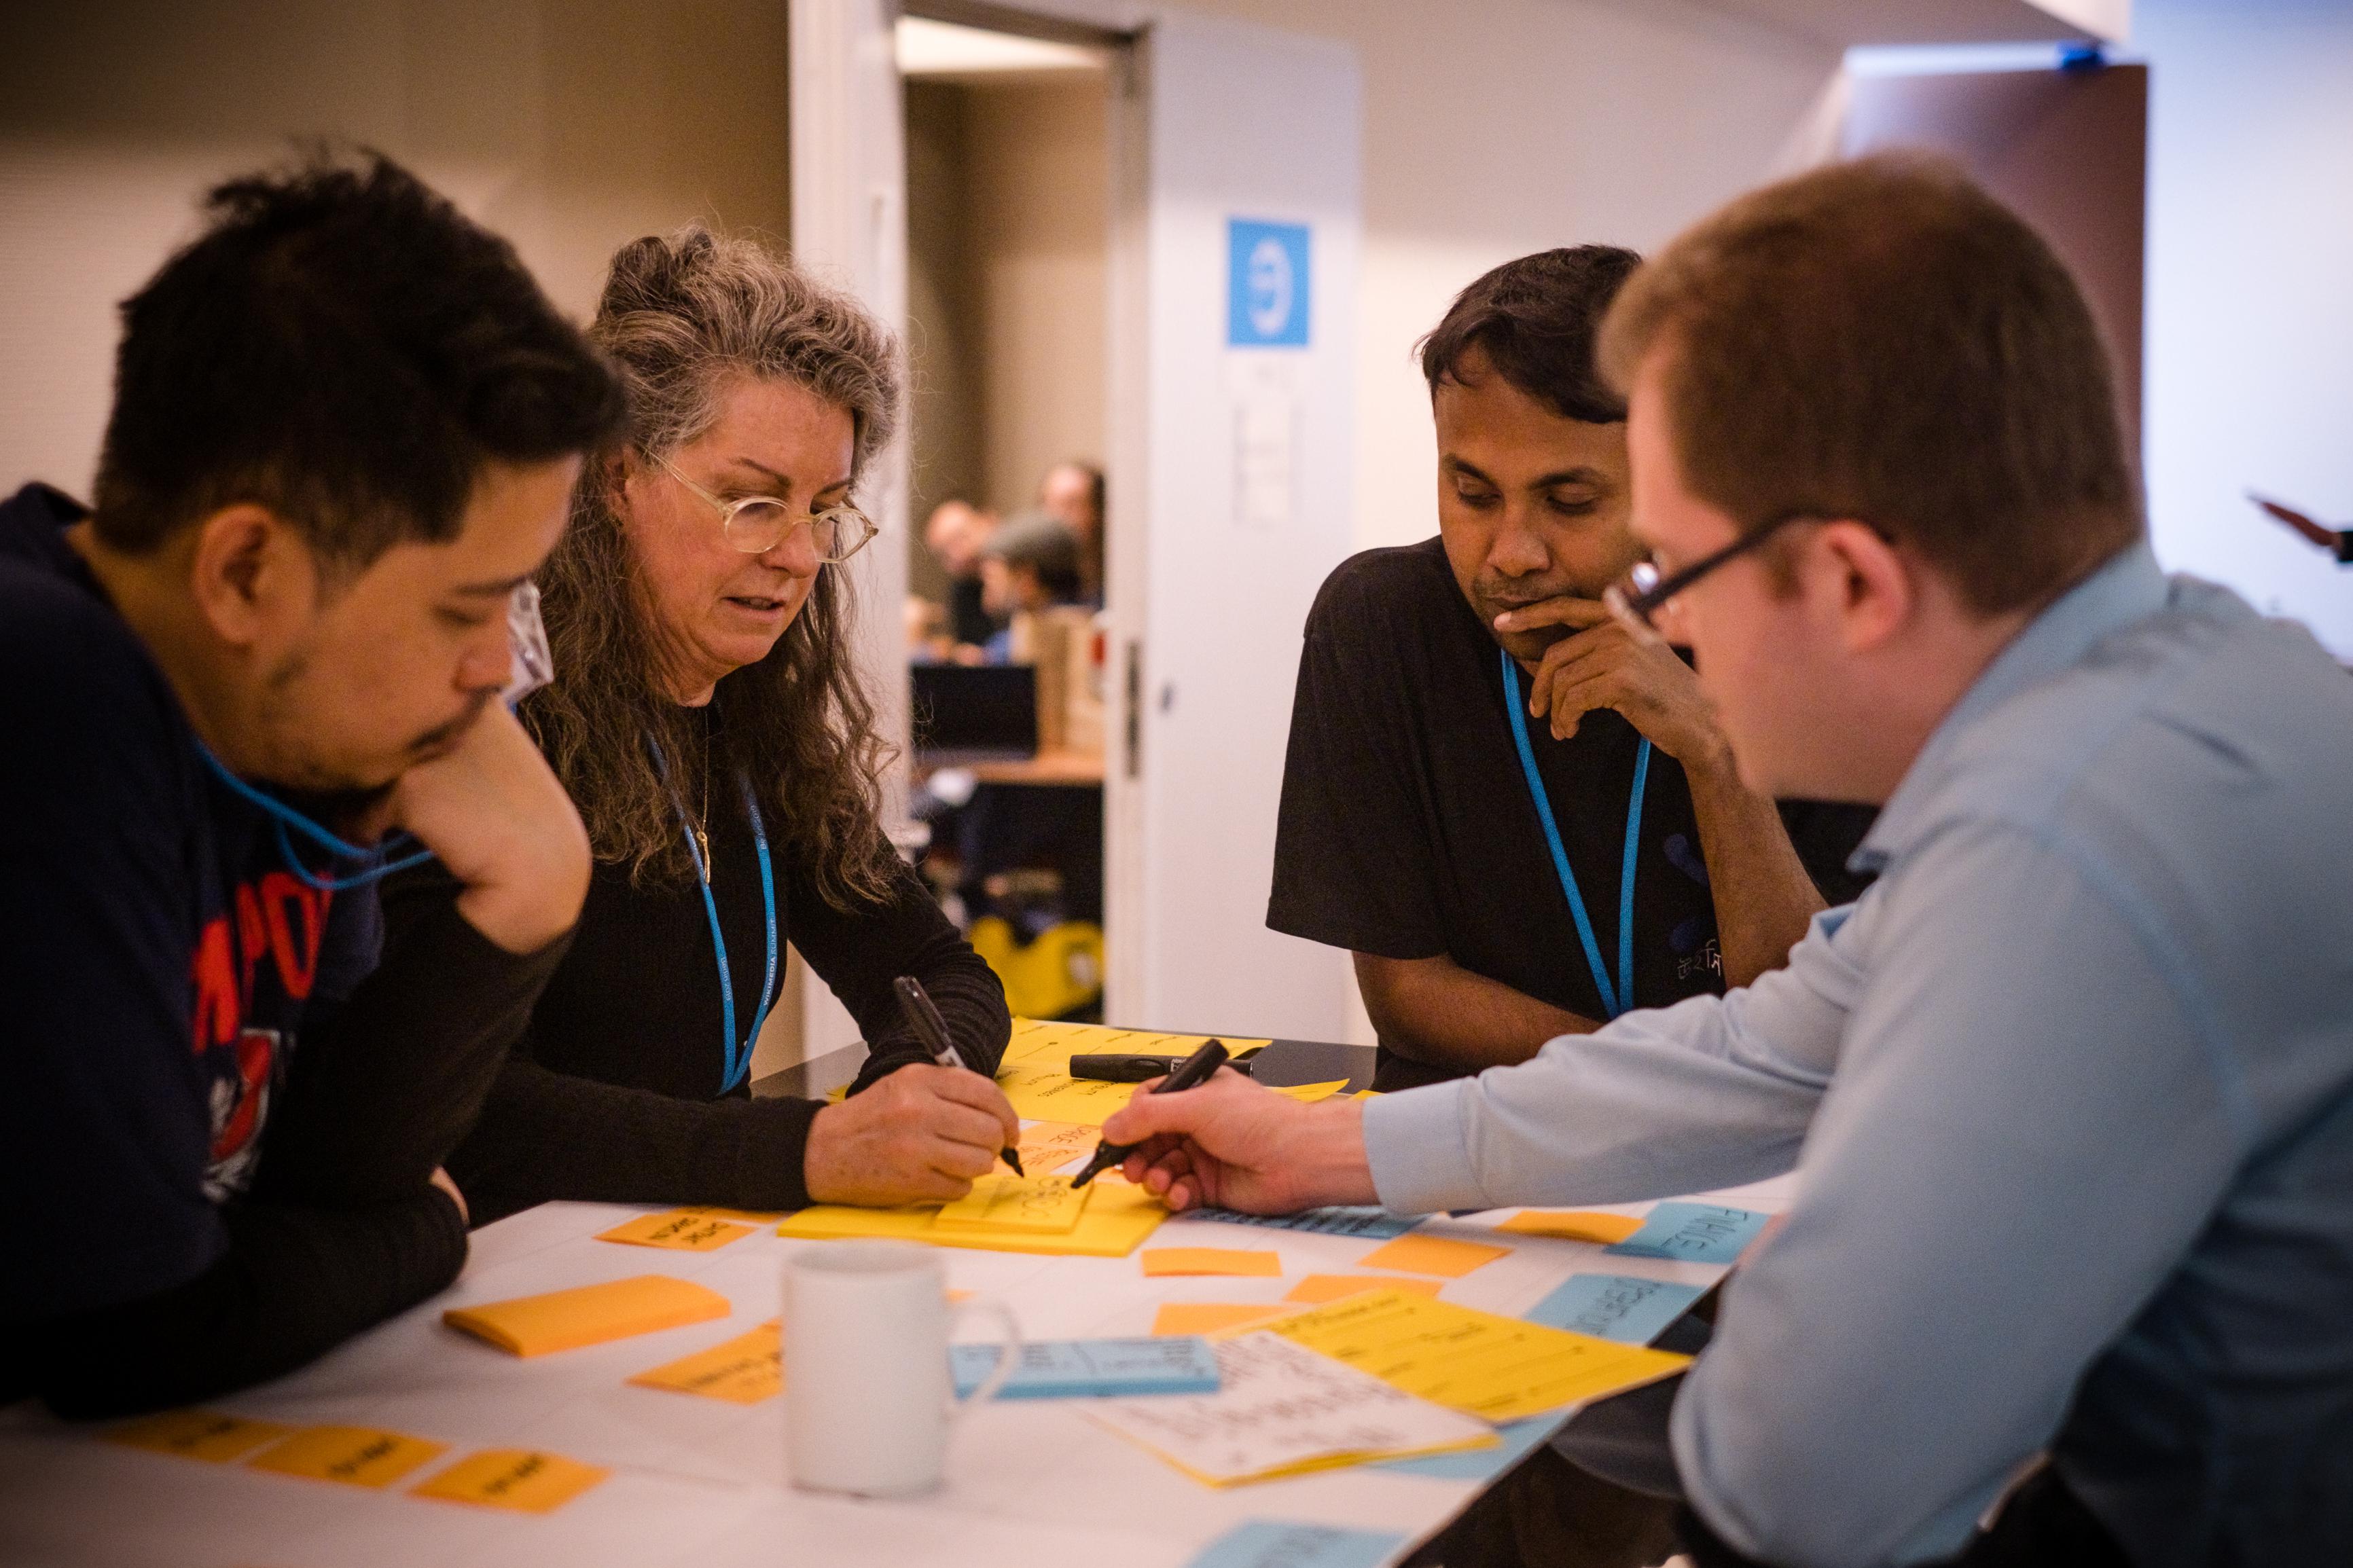 Photograph of four people thinking together, discussing, and writing at the 2019 Wikimedia Summit